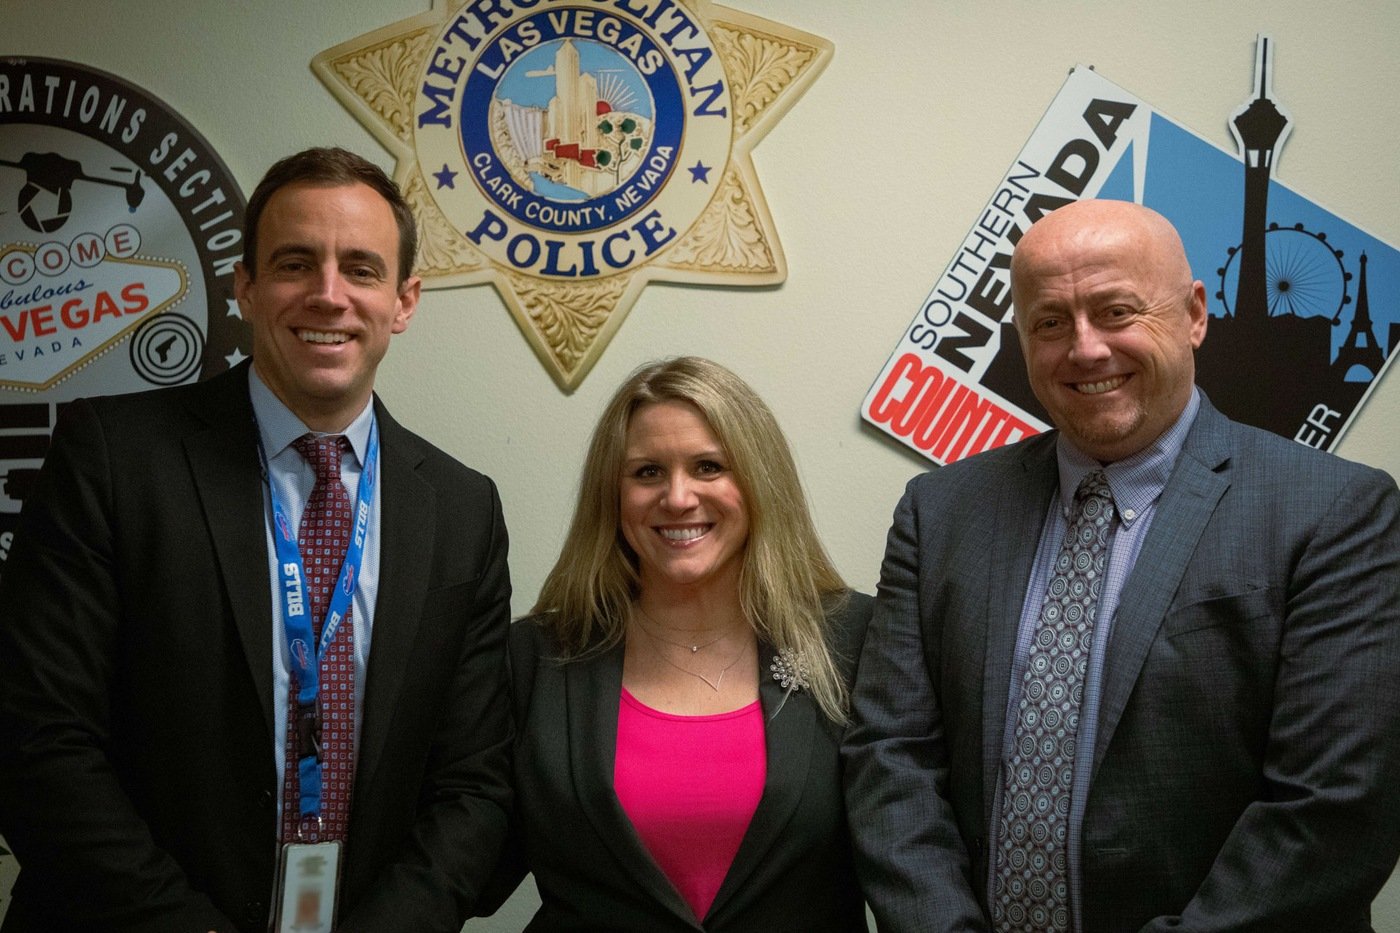 Section Lieutenant, Southern Nevada Counterterrorism Center Adam Seely, Supervisory Special Agent Mari Panovich, and Executive Director, Southern Nevada Counterterrorism Center Cary Underwood pose for a photo at the Las Vegas Fusion Center.